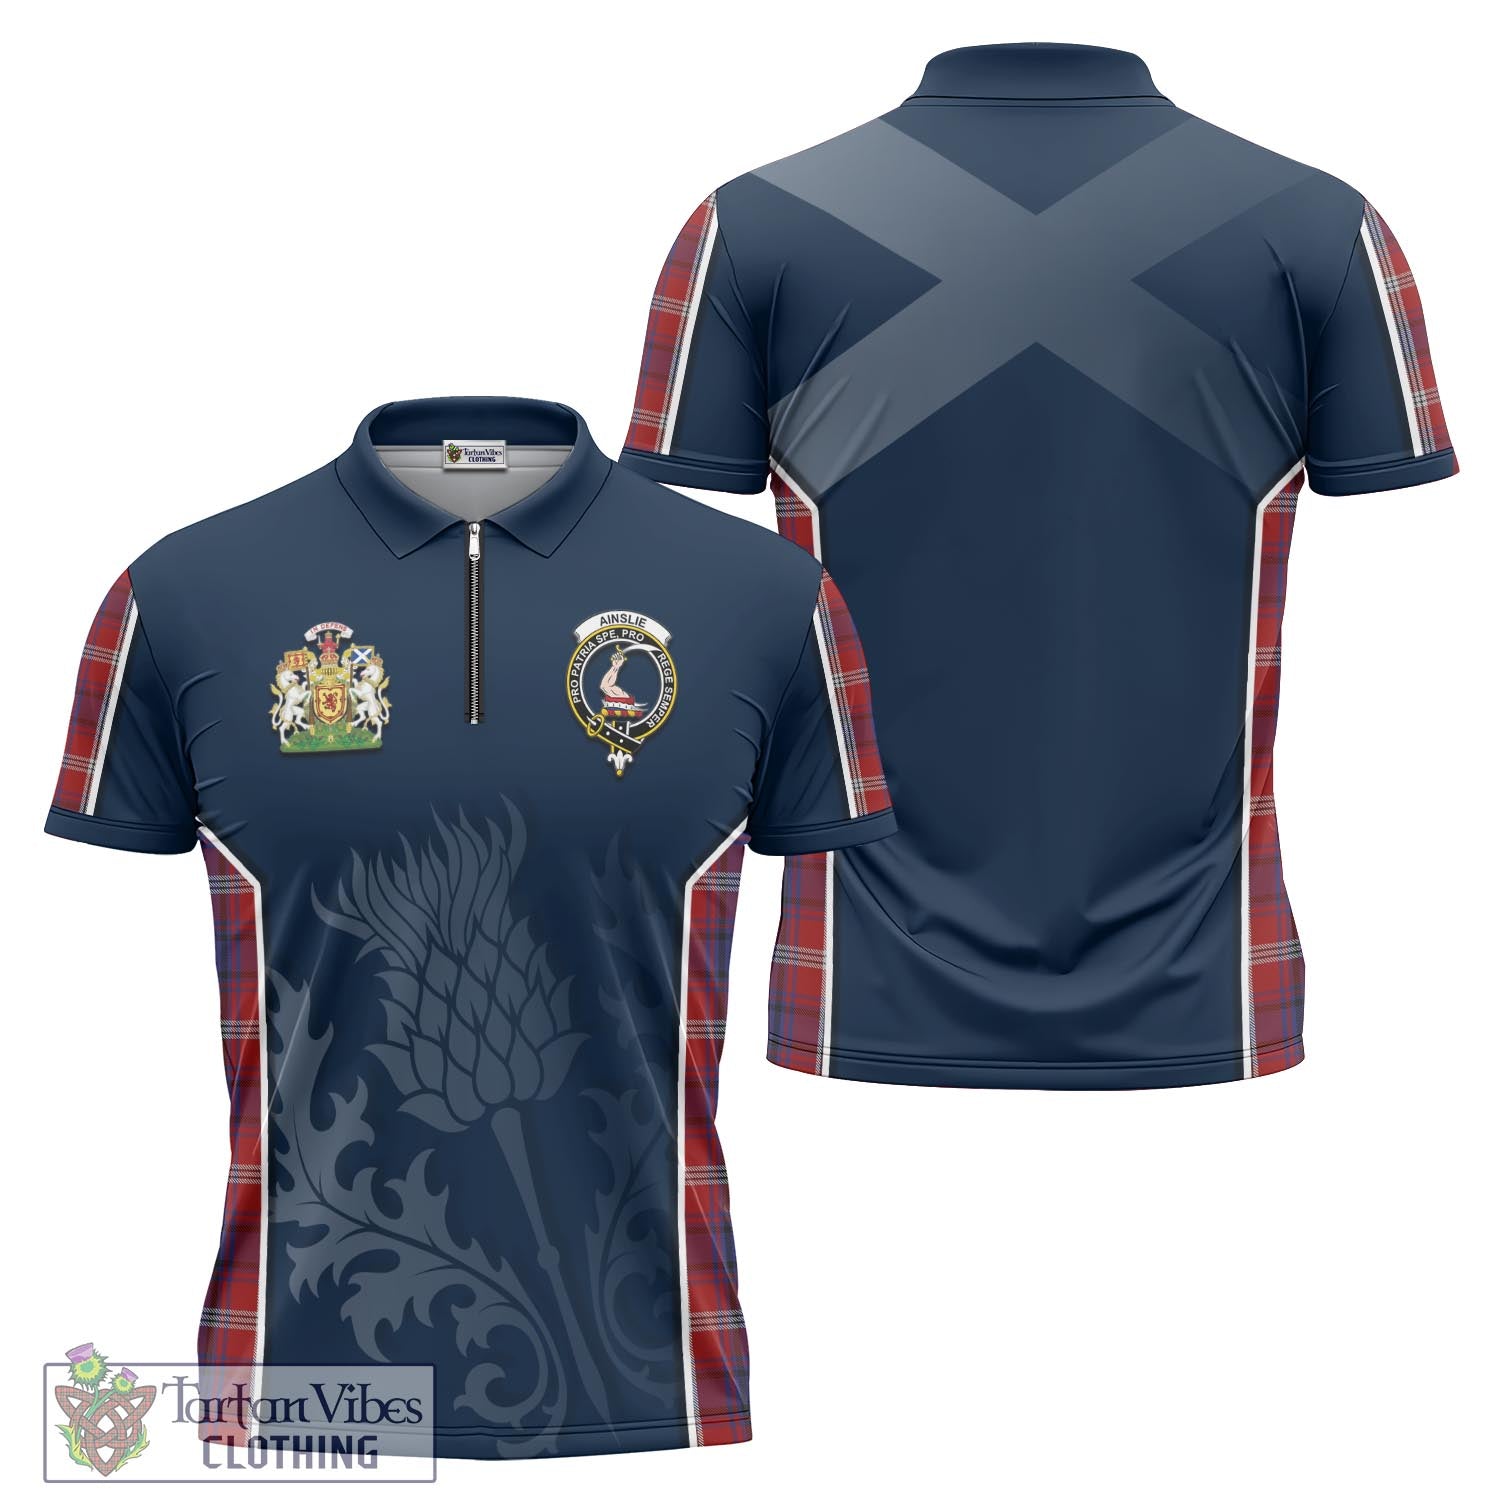 Tartan Vibes Clothing Ainslie Tartan Zipper Polo Shirt with Family Crest and Scottish Thistle Vibes Sport Style